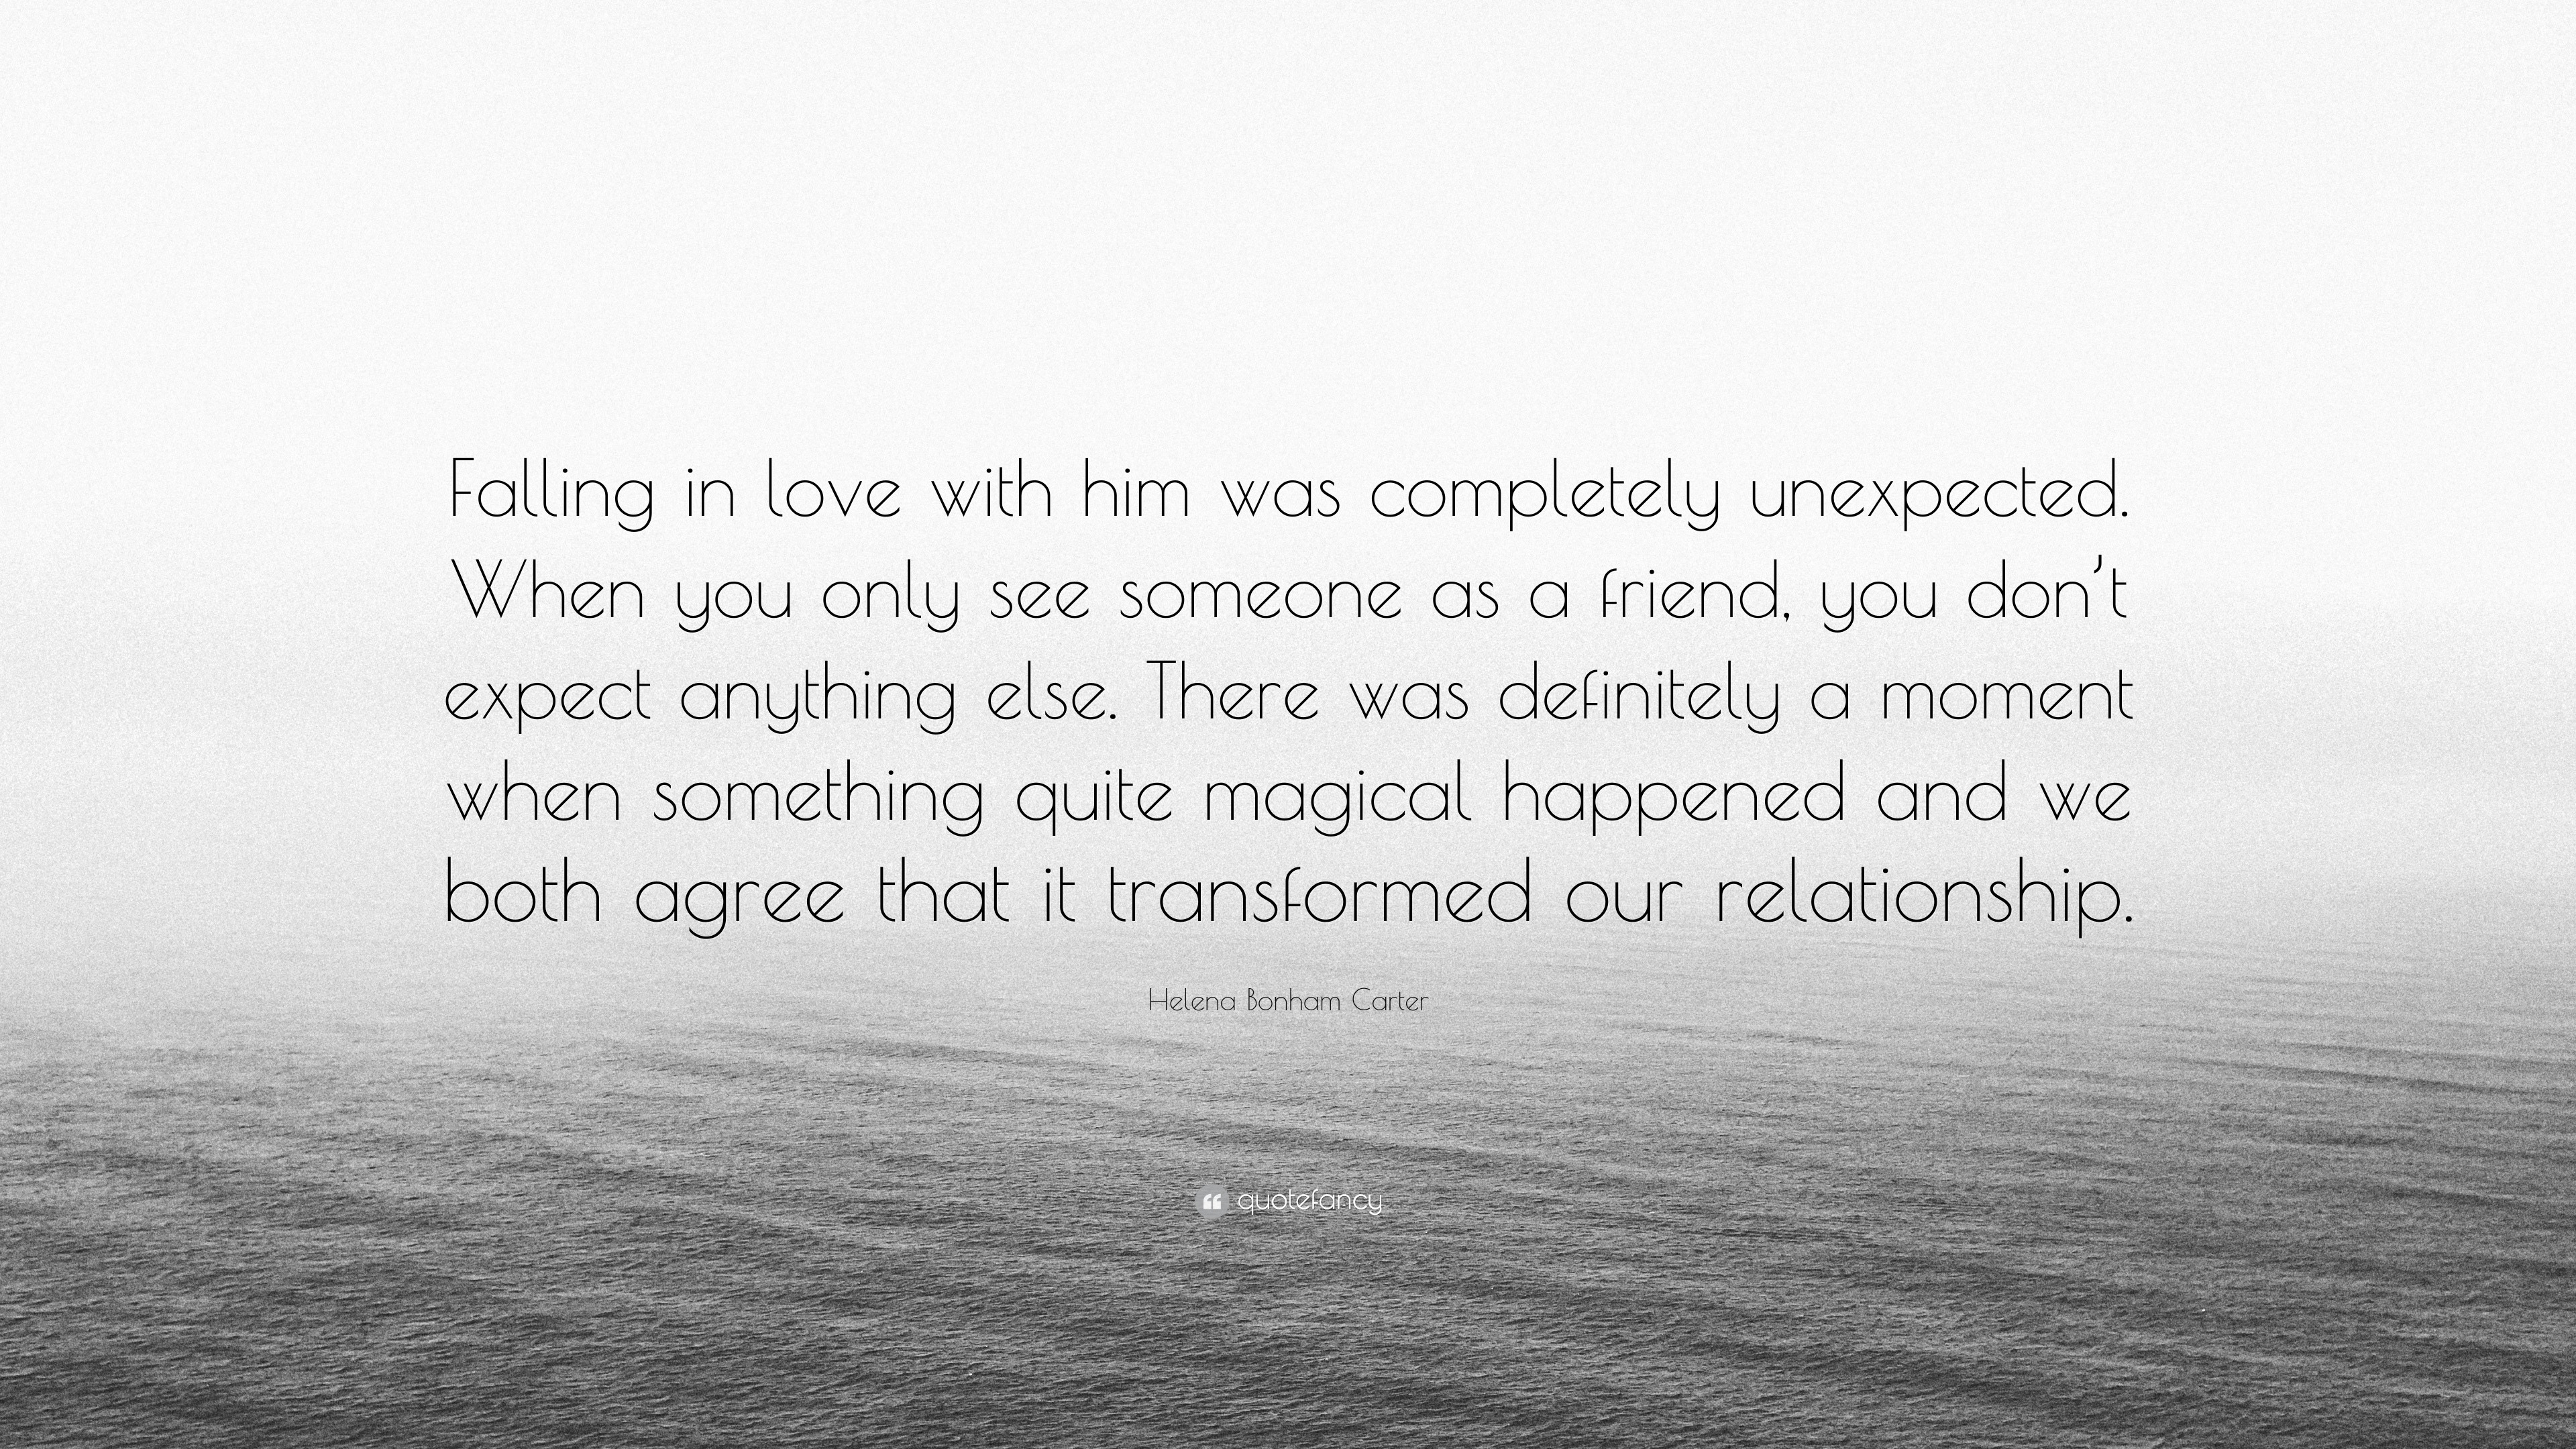 quotes about finding love unexpectedly